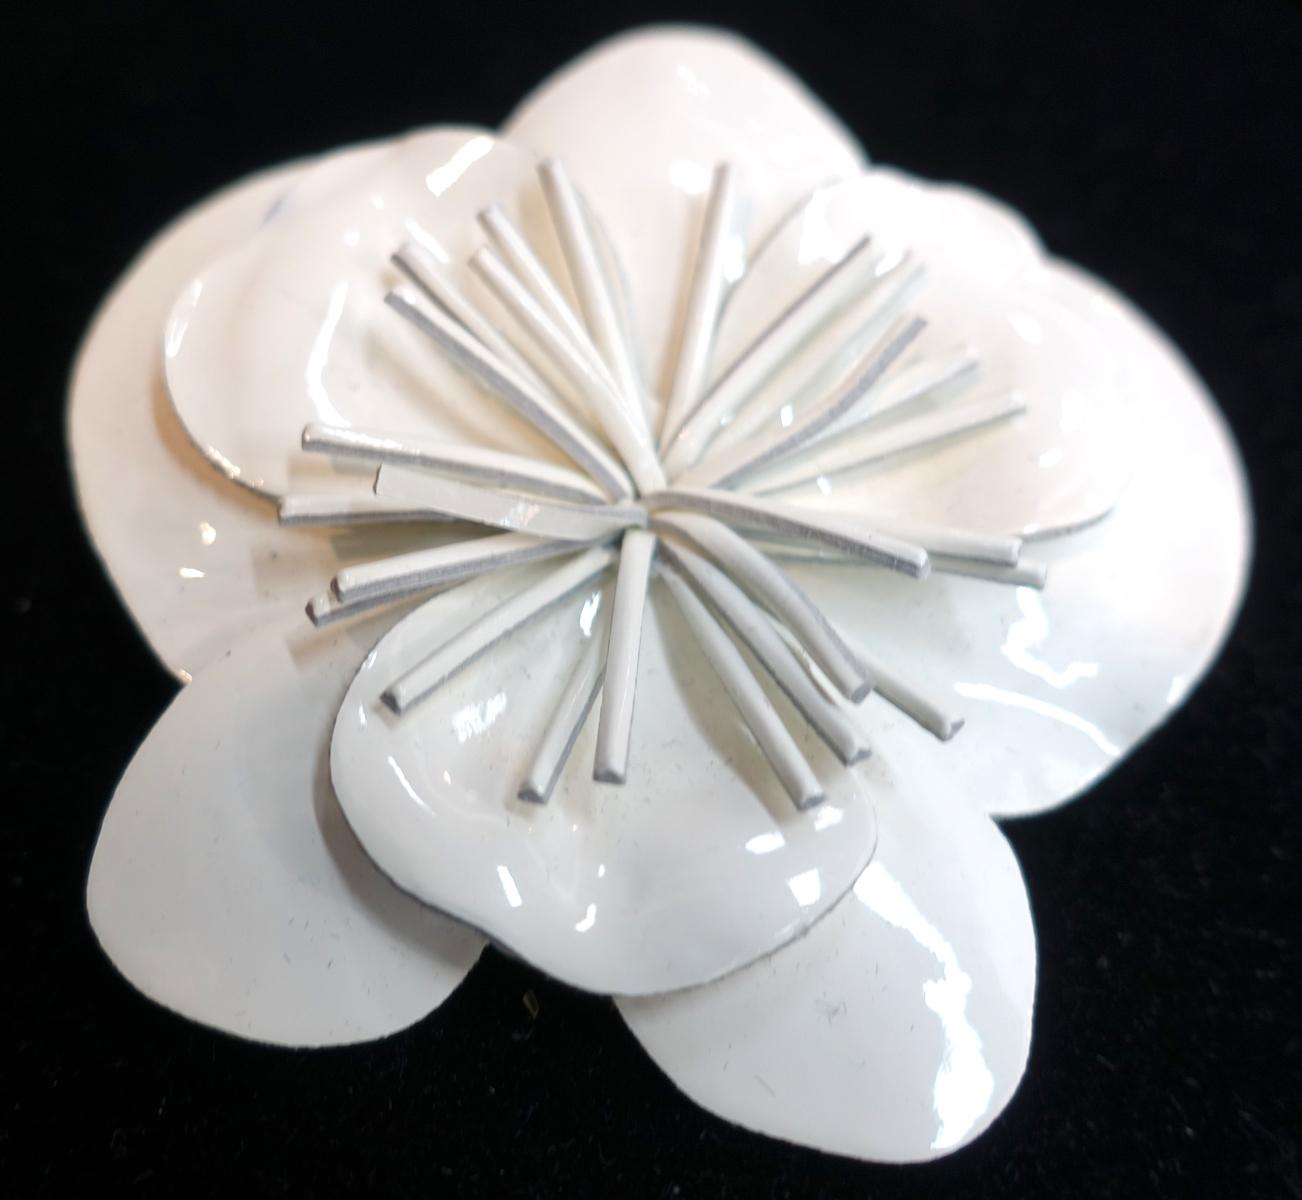 This vintage signed Anne Fontaine Italy brooch features a floral design in white vinyl.  This brooch measures 3-1/2” in diameter and is signed “Anne Fontaine – Made in Italy”.  It is in excellent condition.